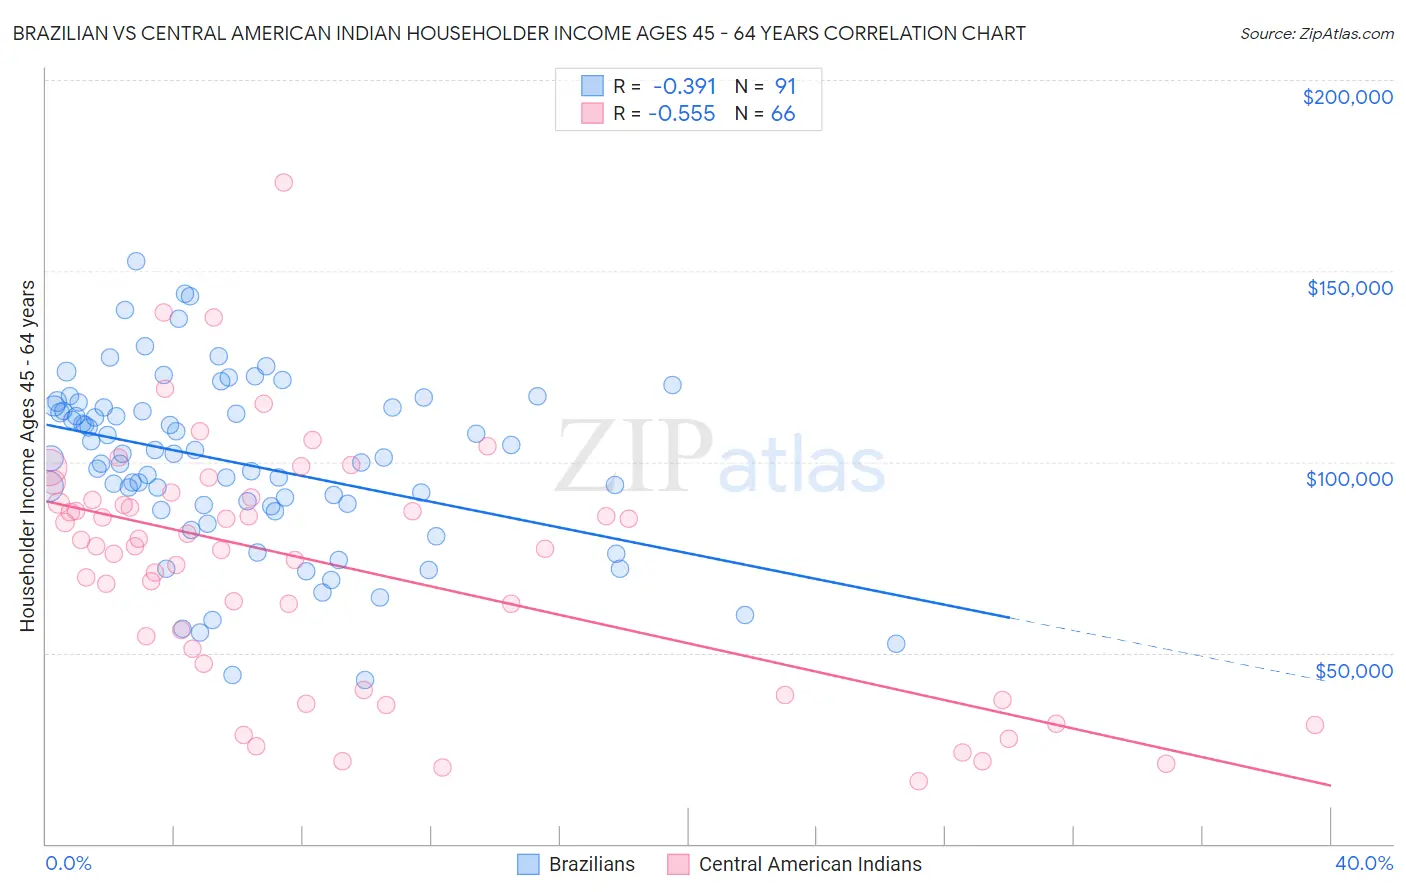 Brazilian vs Central American Indian Householder Income Ages 45 - 64 years